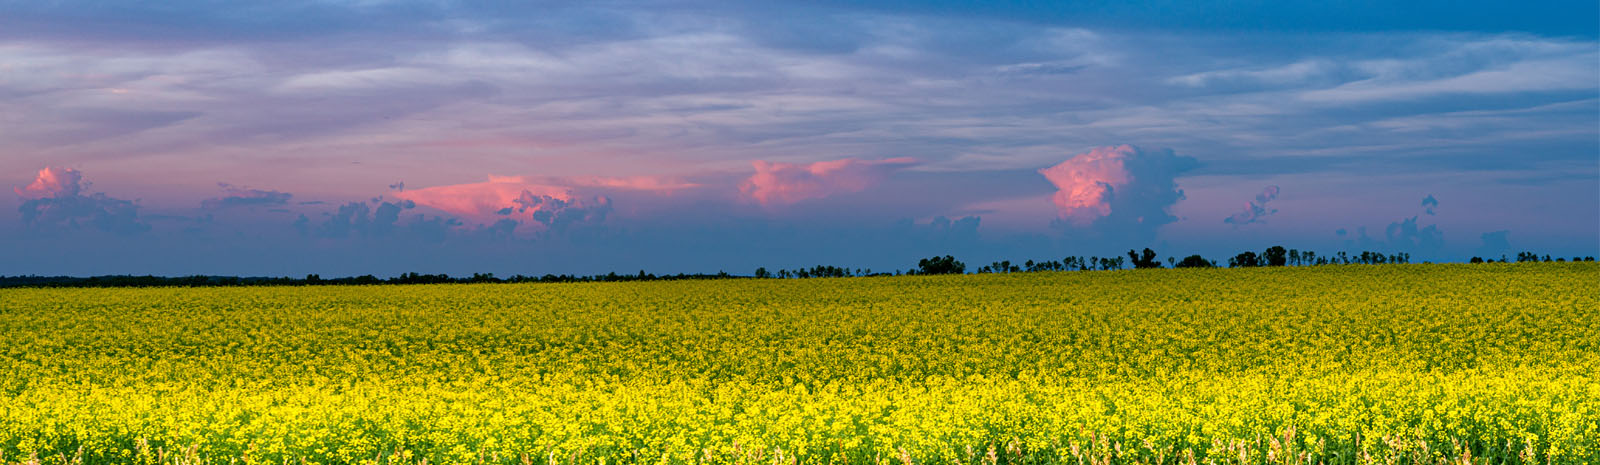 Canola filed in bloom